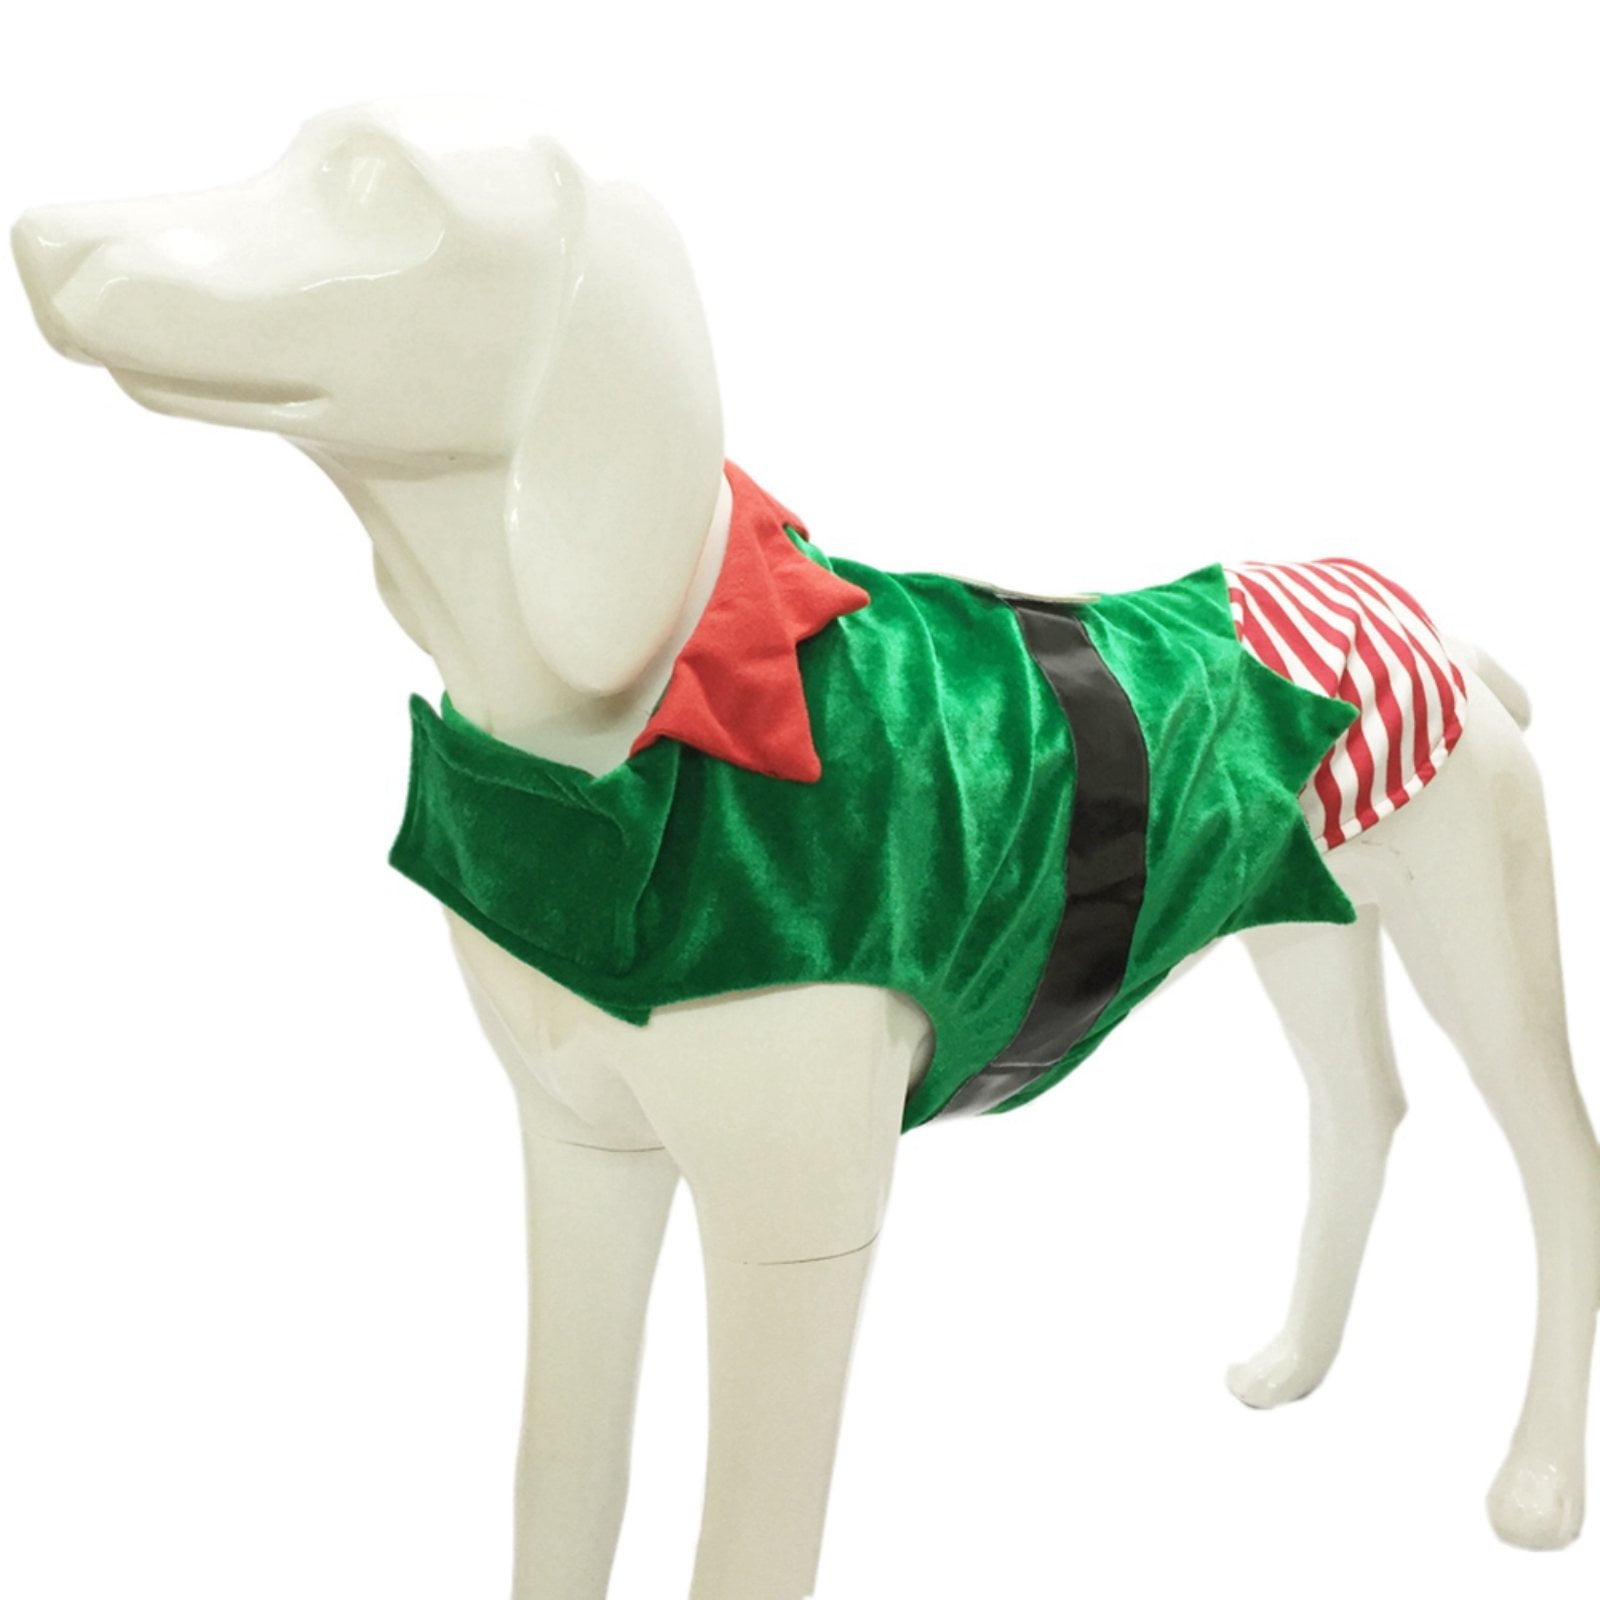 Dog Christmas Elf Shirt Jumper Outfit with Felt collar Small Medium or Large large